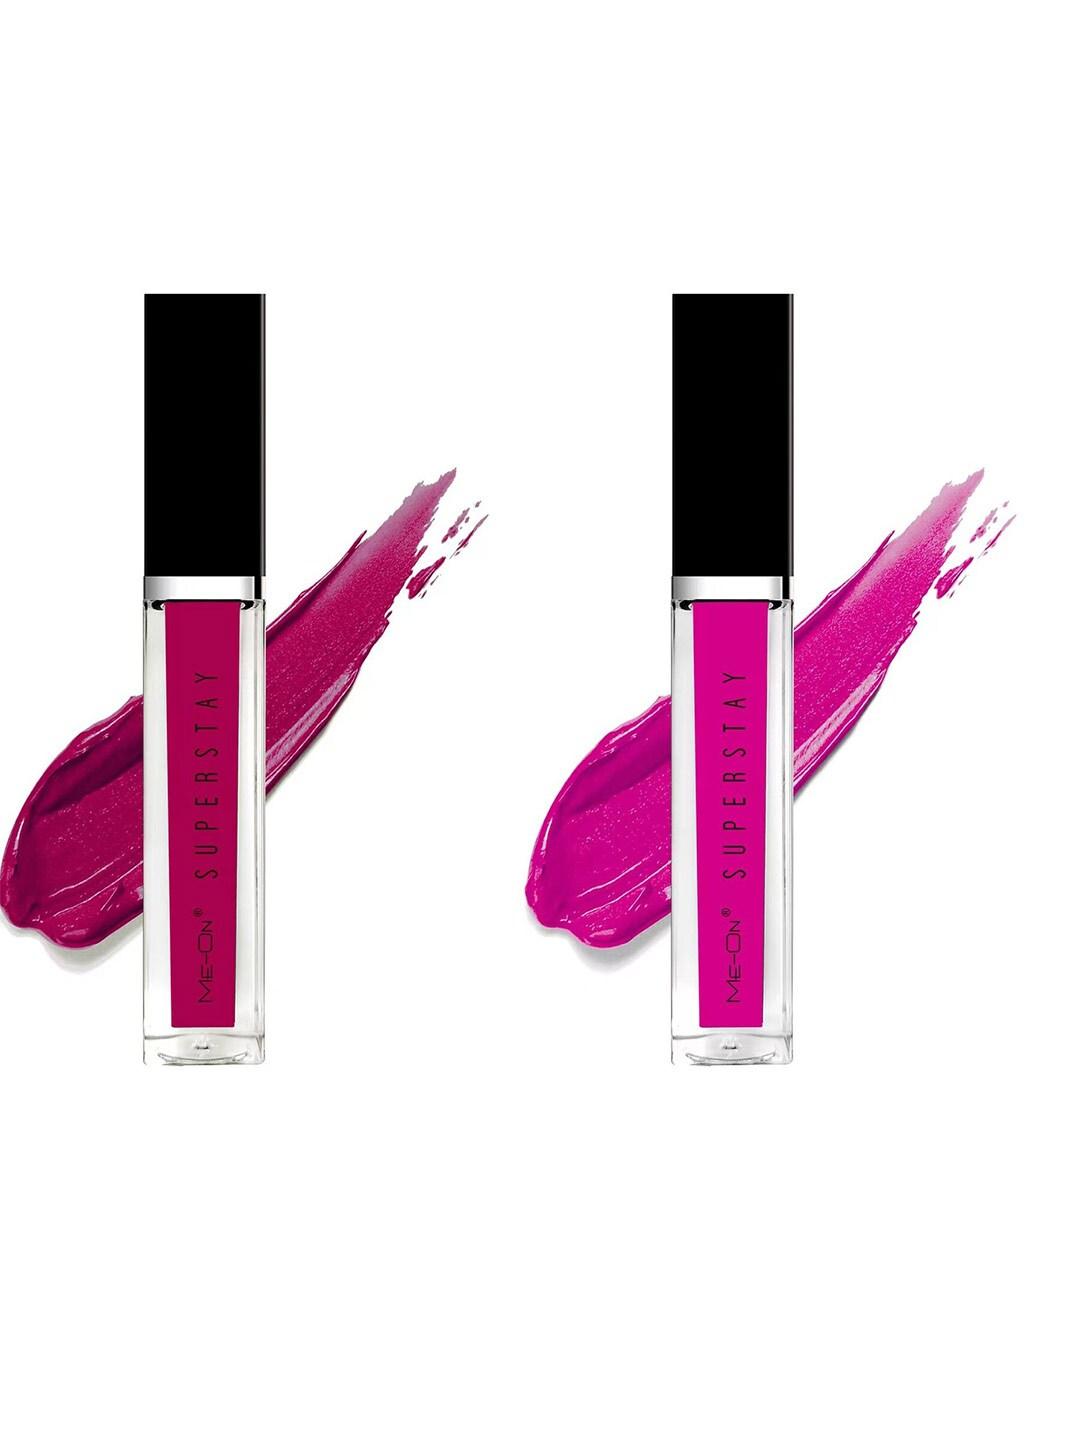 me-on-set-of-2-super-stay-lip-gloss-6ml-each---fuschia-09-&-passionate-pink-10